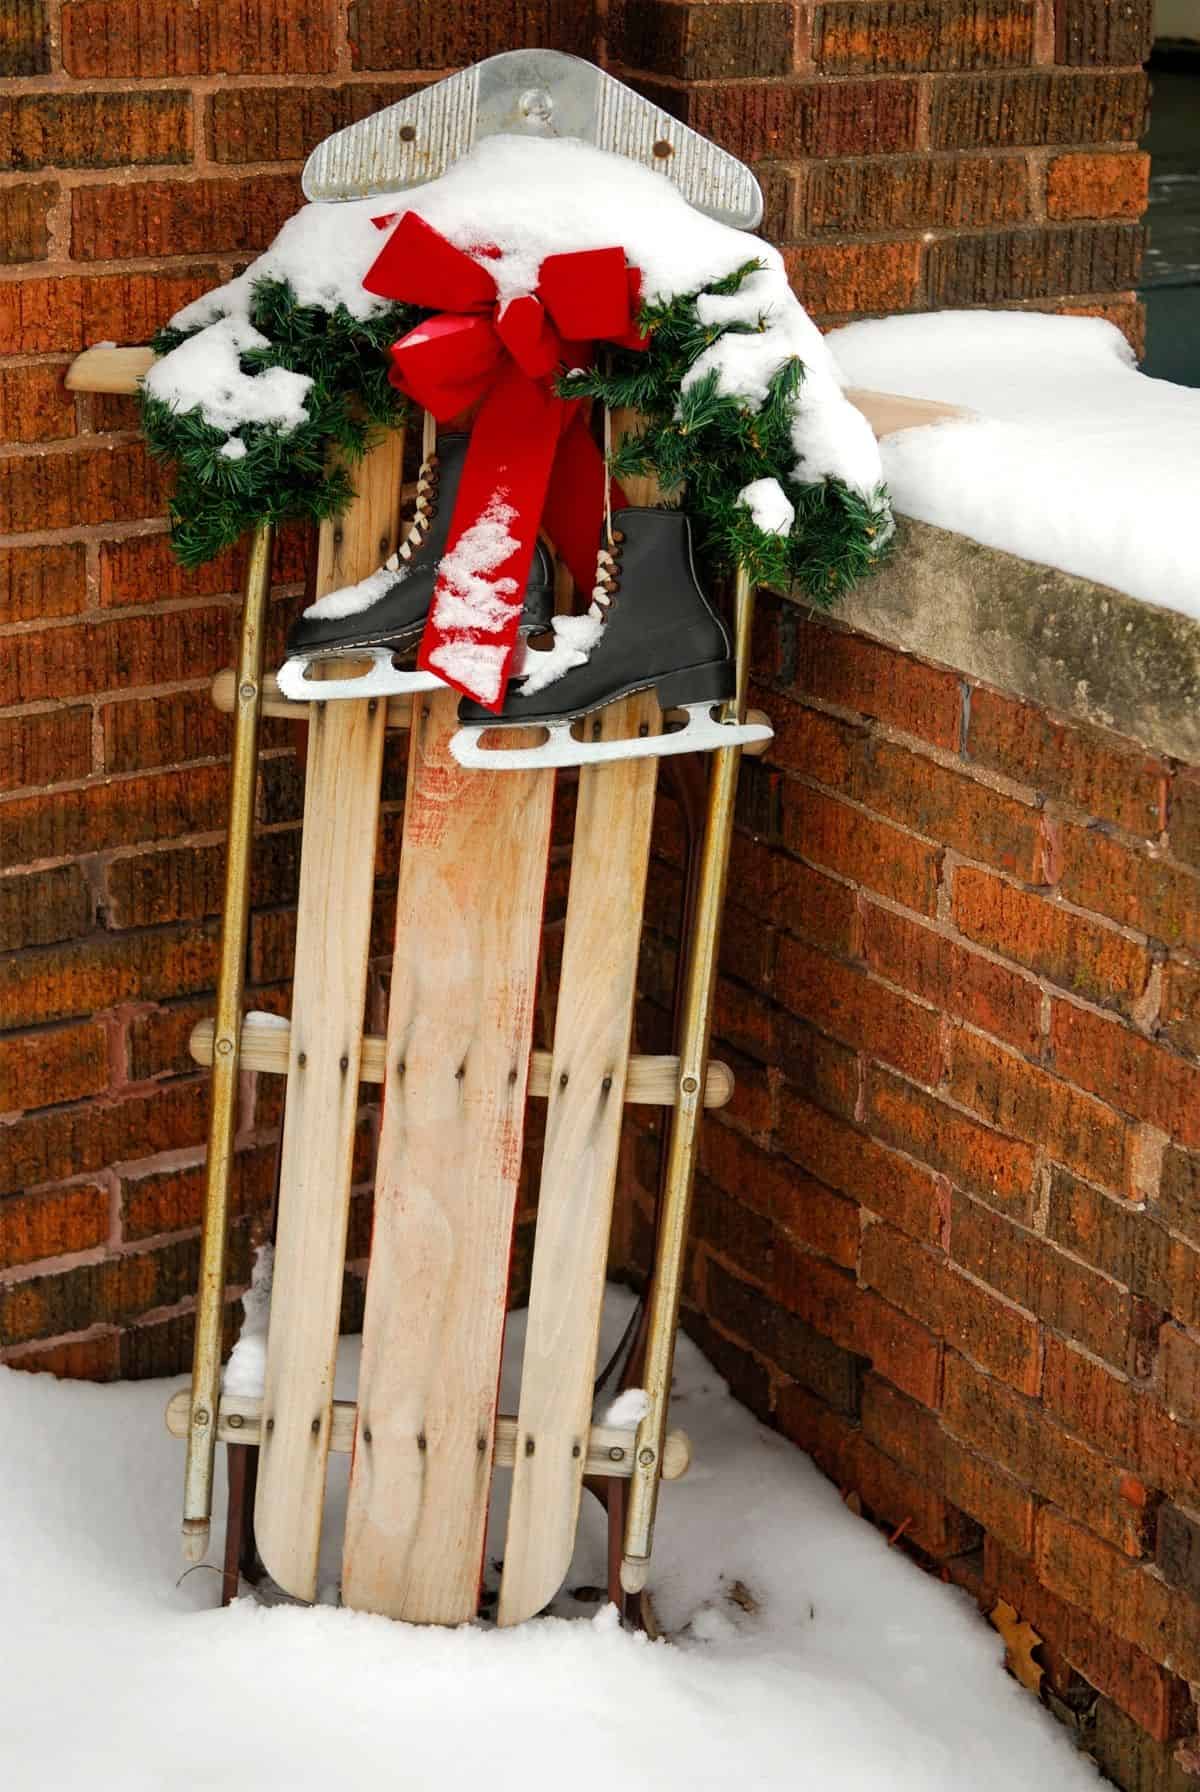 Wooden sled draped with ice skates leaning up against a brick wall